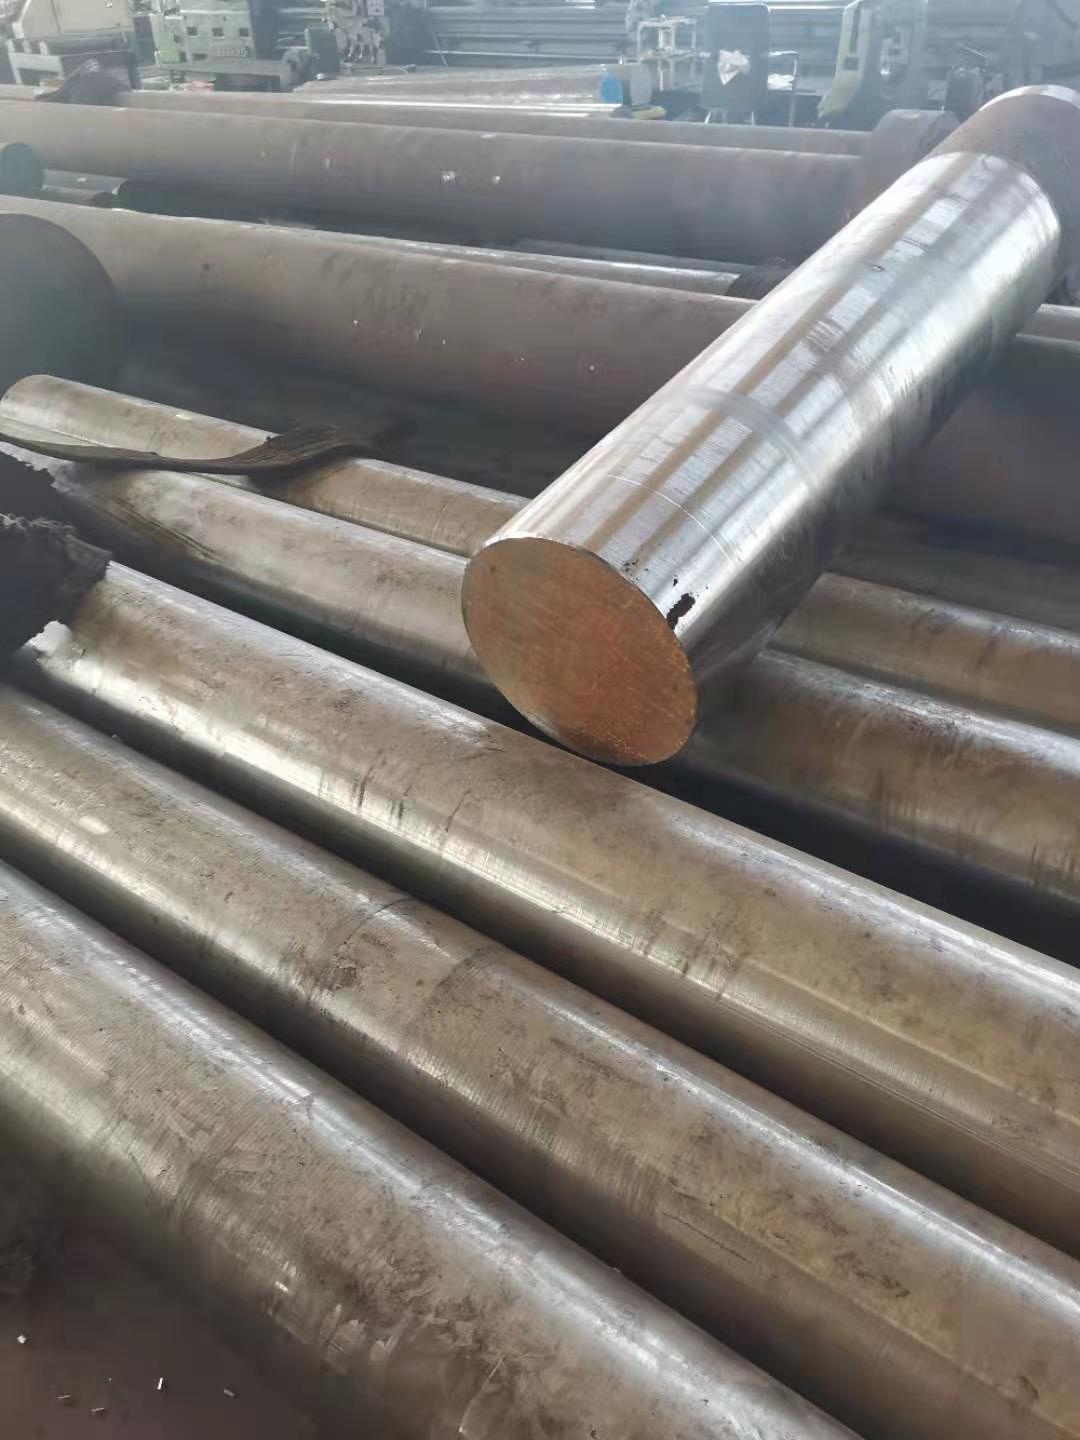 Hot New Products High Speed Steel Price - HSS material High quality round bar M1 M2 M42 1.3327 1.3343 1.3351 1.3247 high speed tool steel – Herui detail pictures